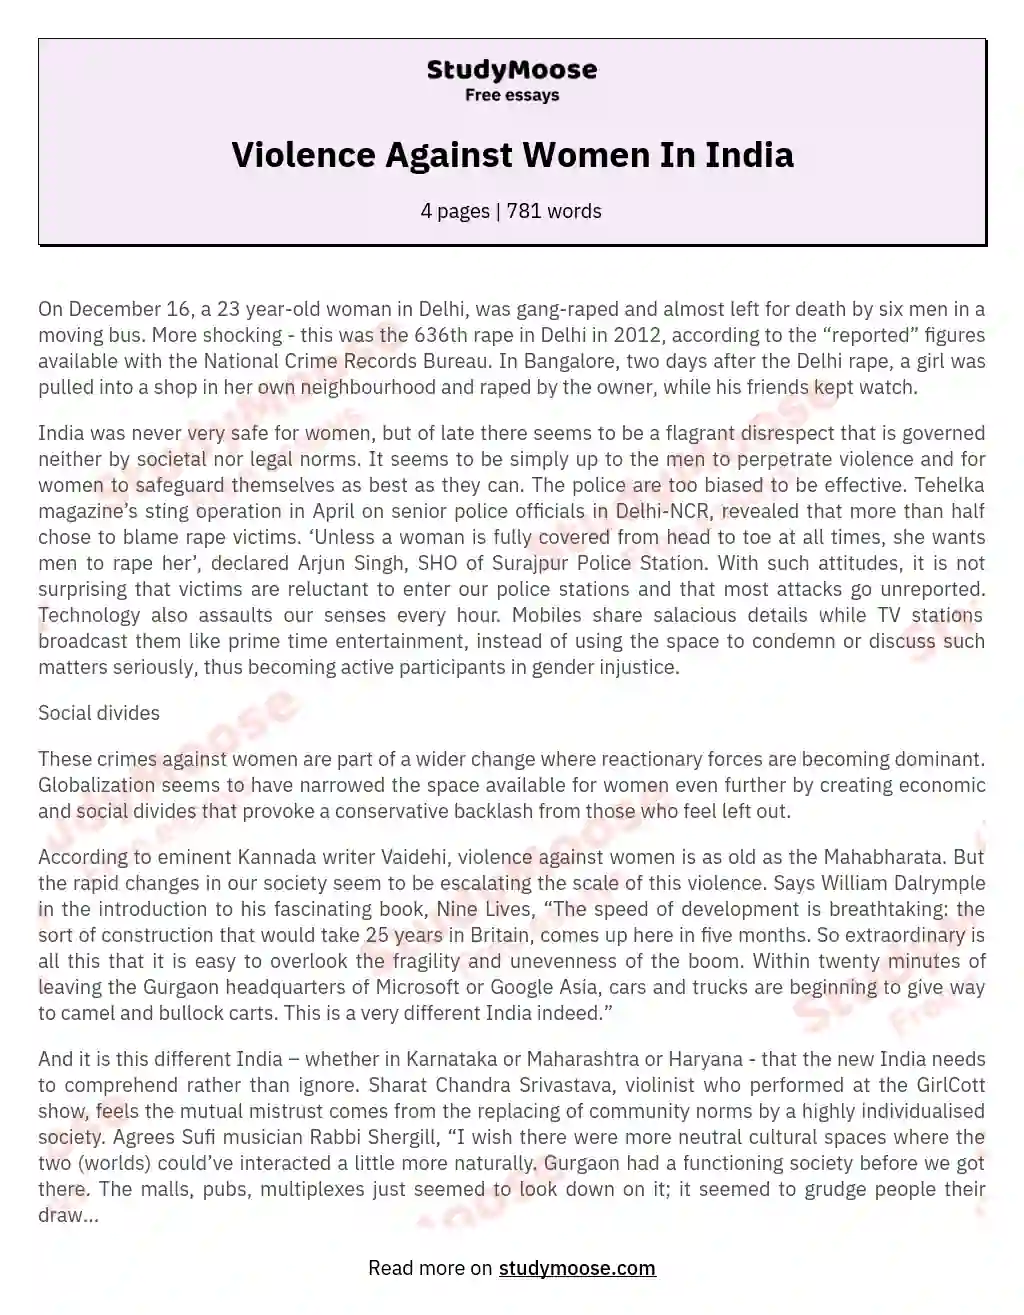 Violence Against Women In India essay